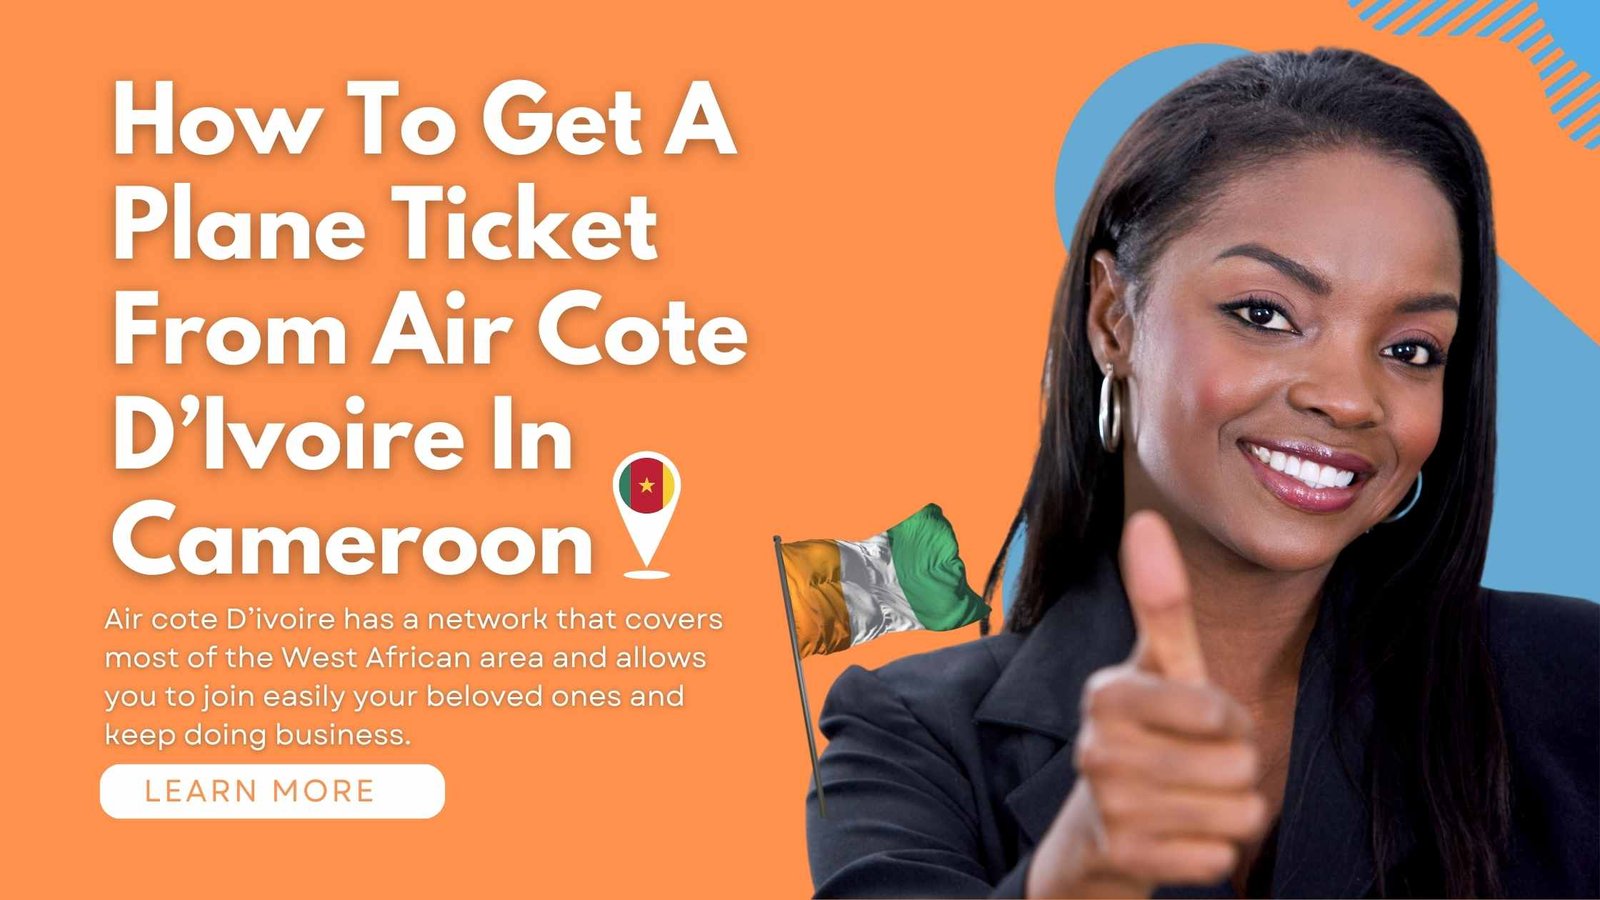 How To Get Air Cote D'Ivoire Flights From Cameroon